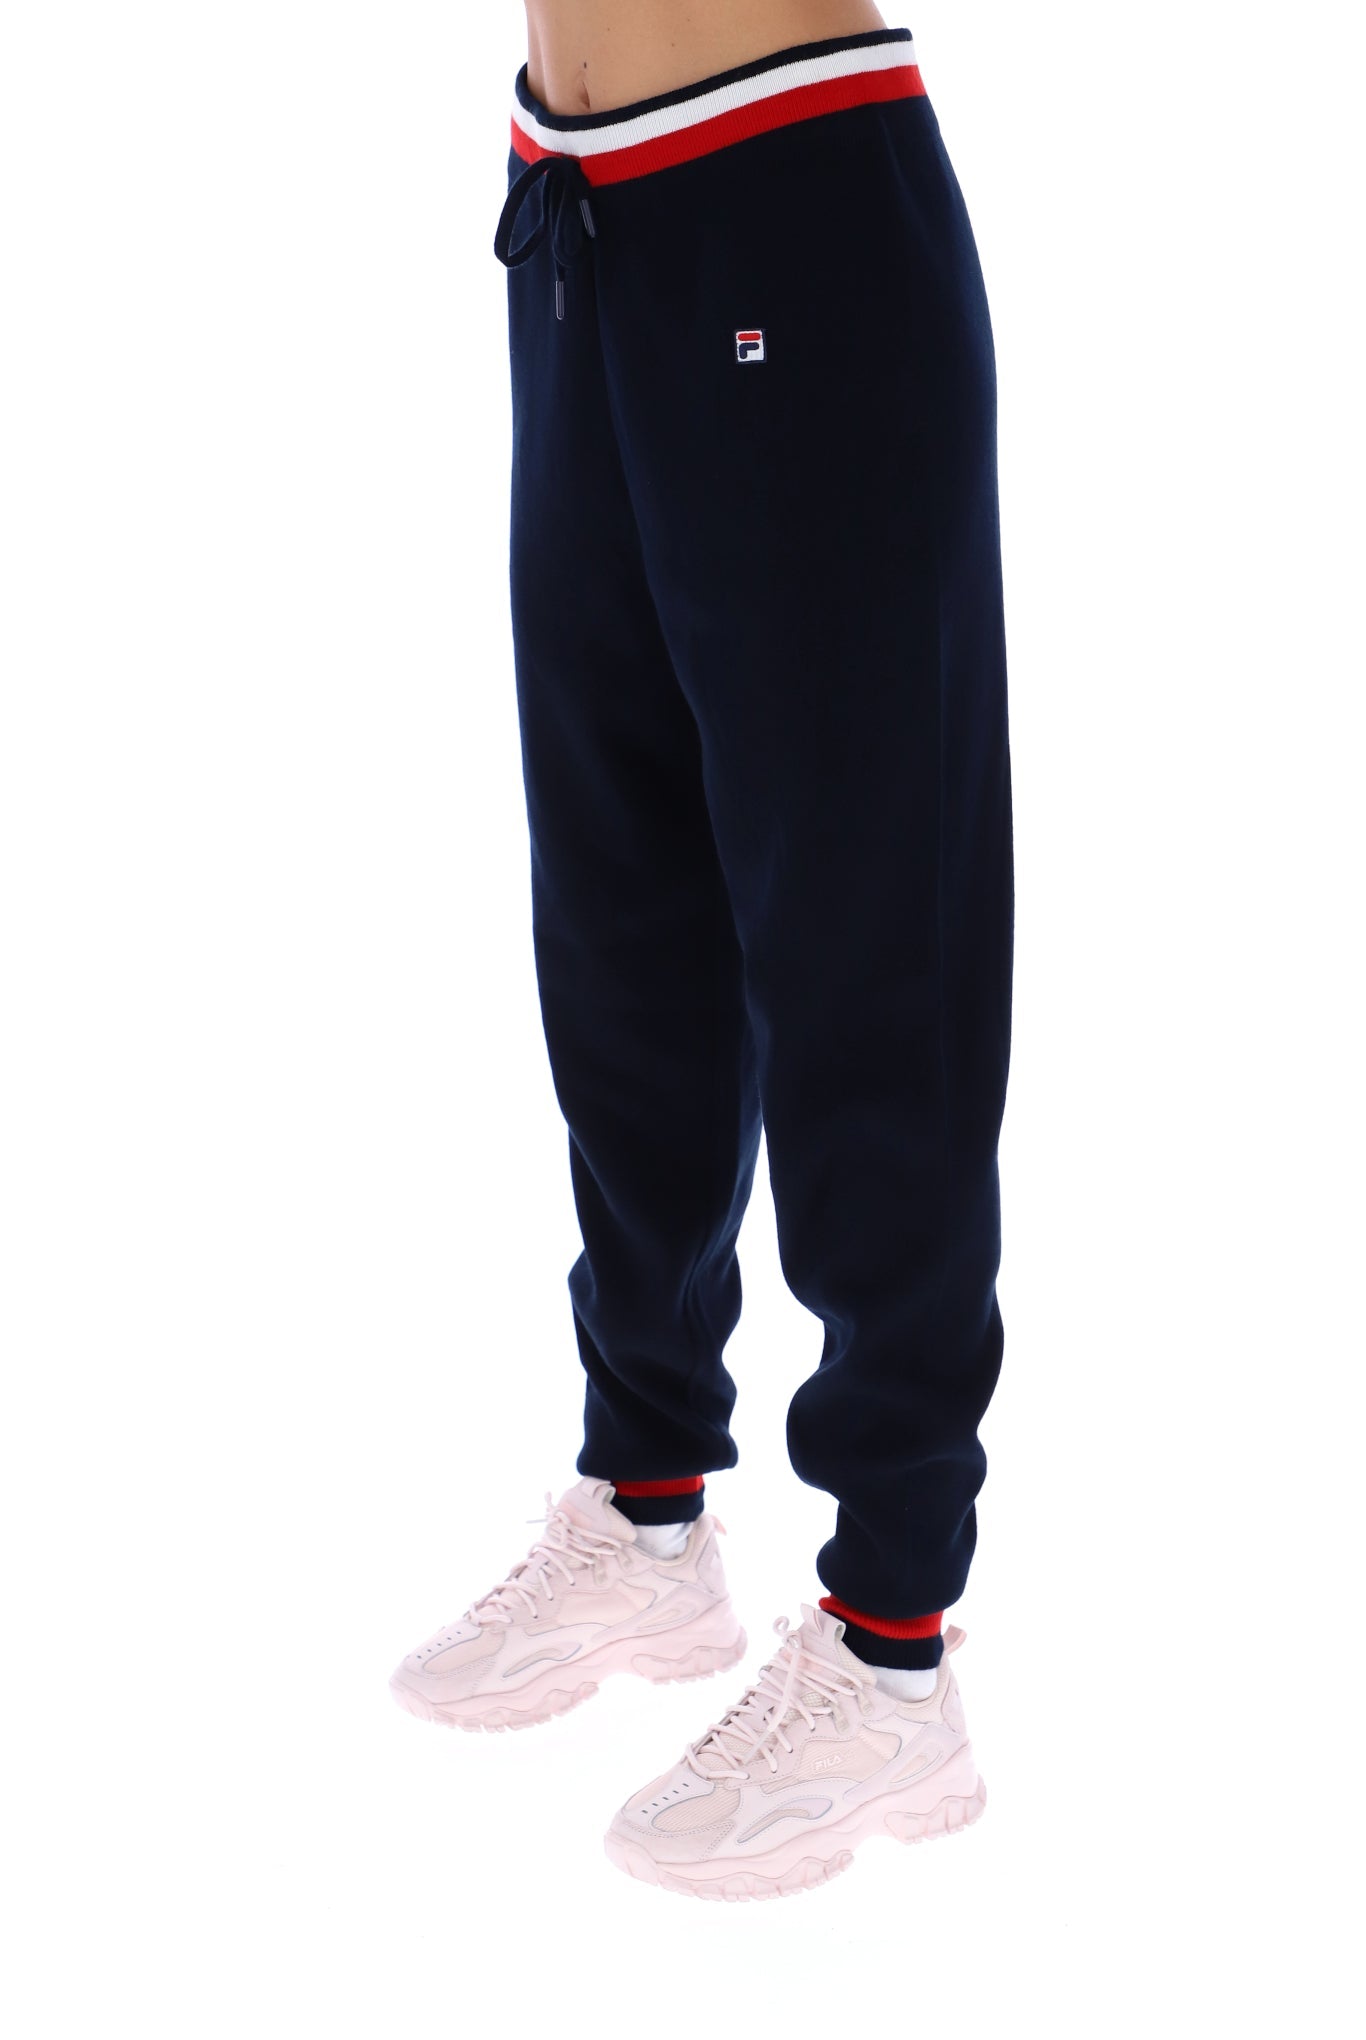 Ladies Frankie Navy/Red/White Knit Pant-Side View